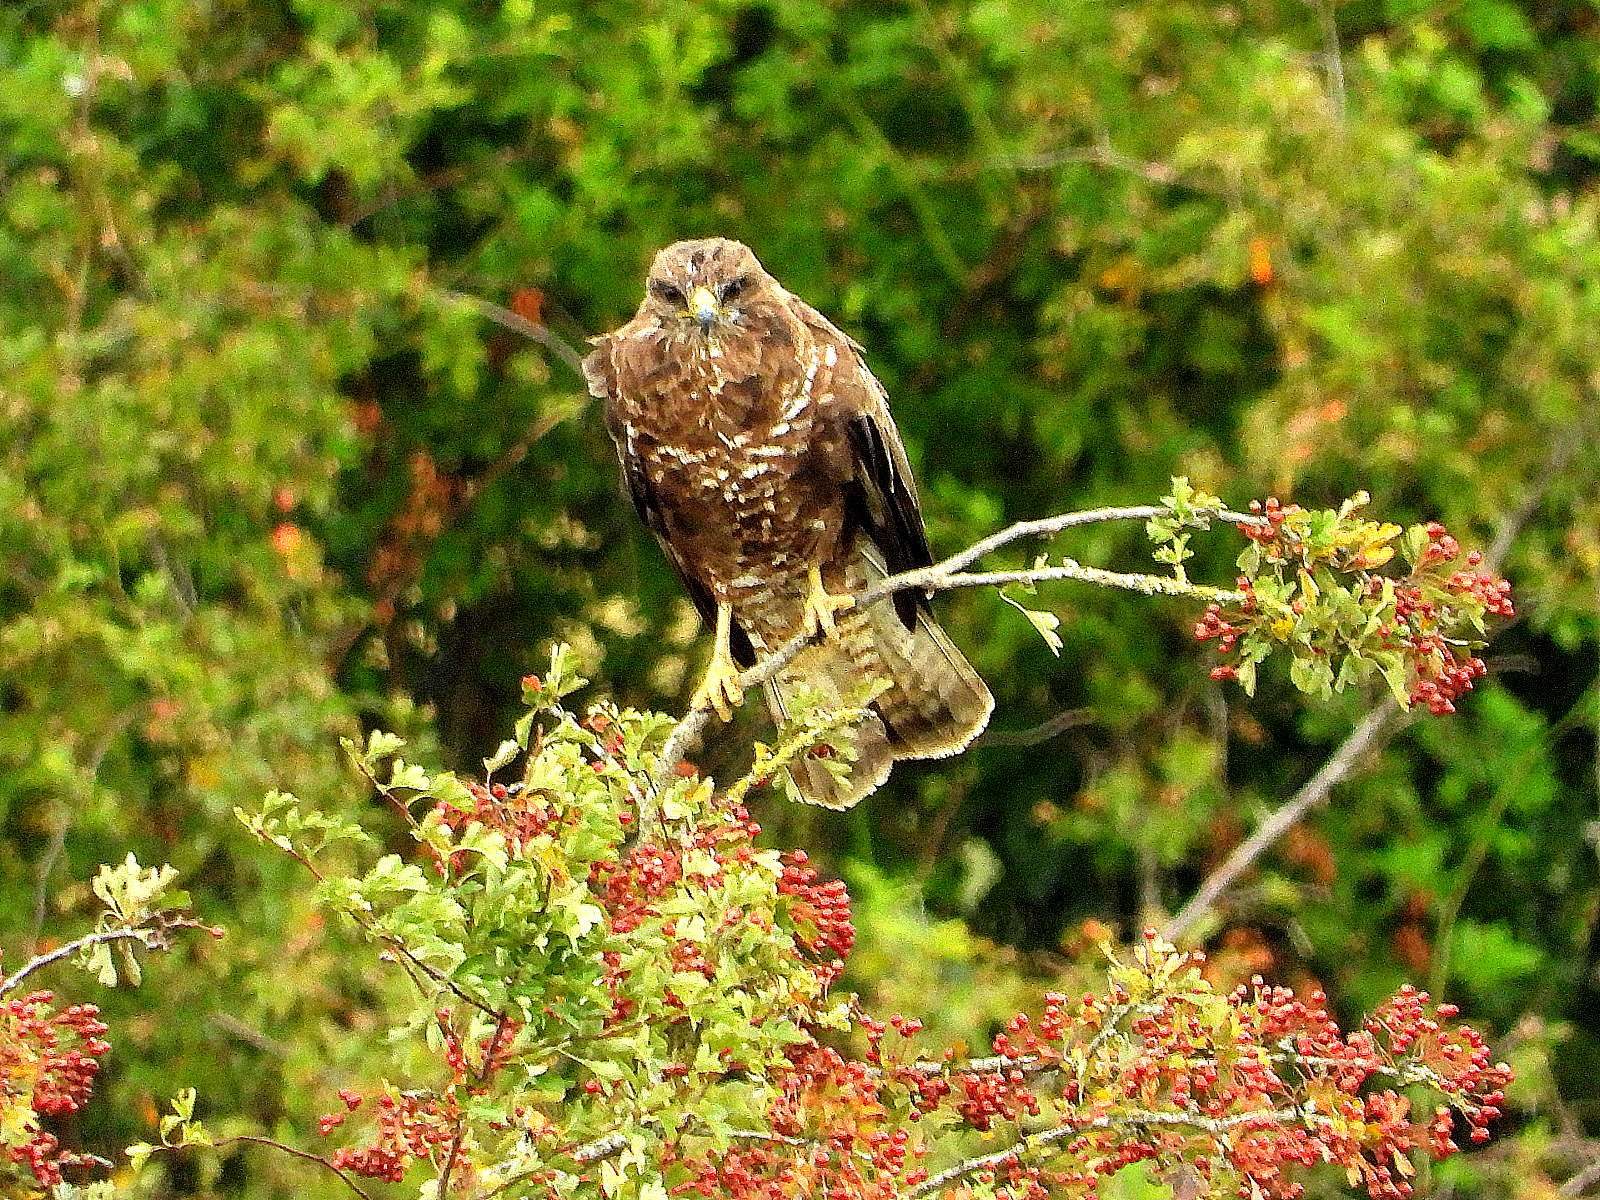 Buzzard by Kenneth Bradley at Exminster Marshes RSPB